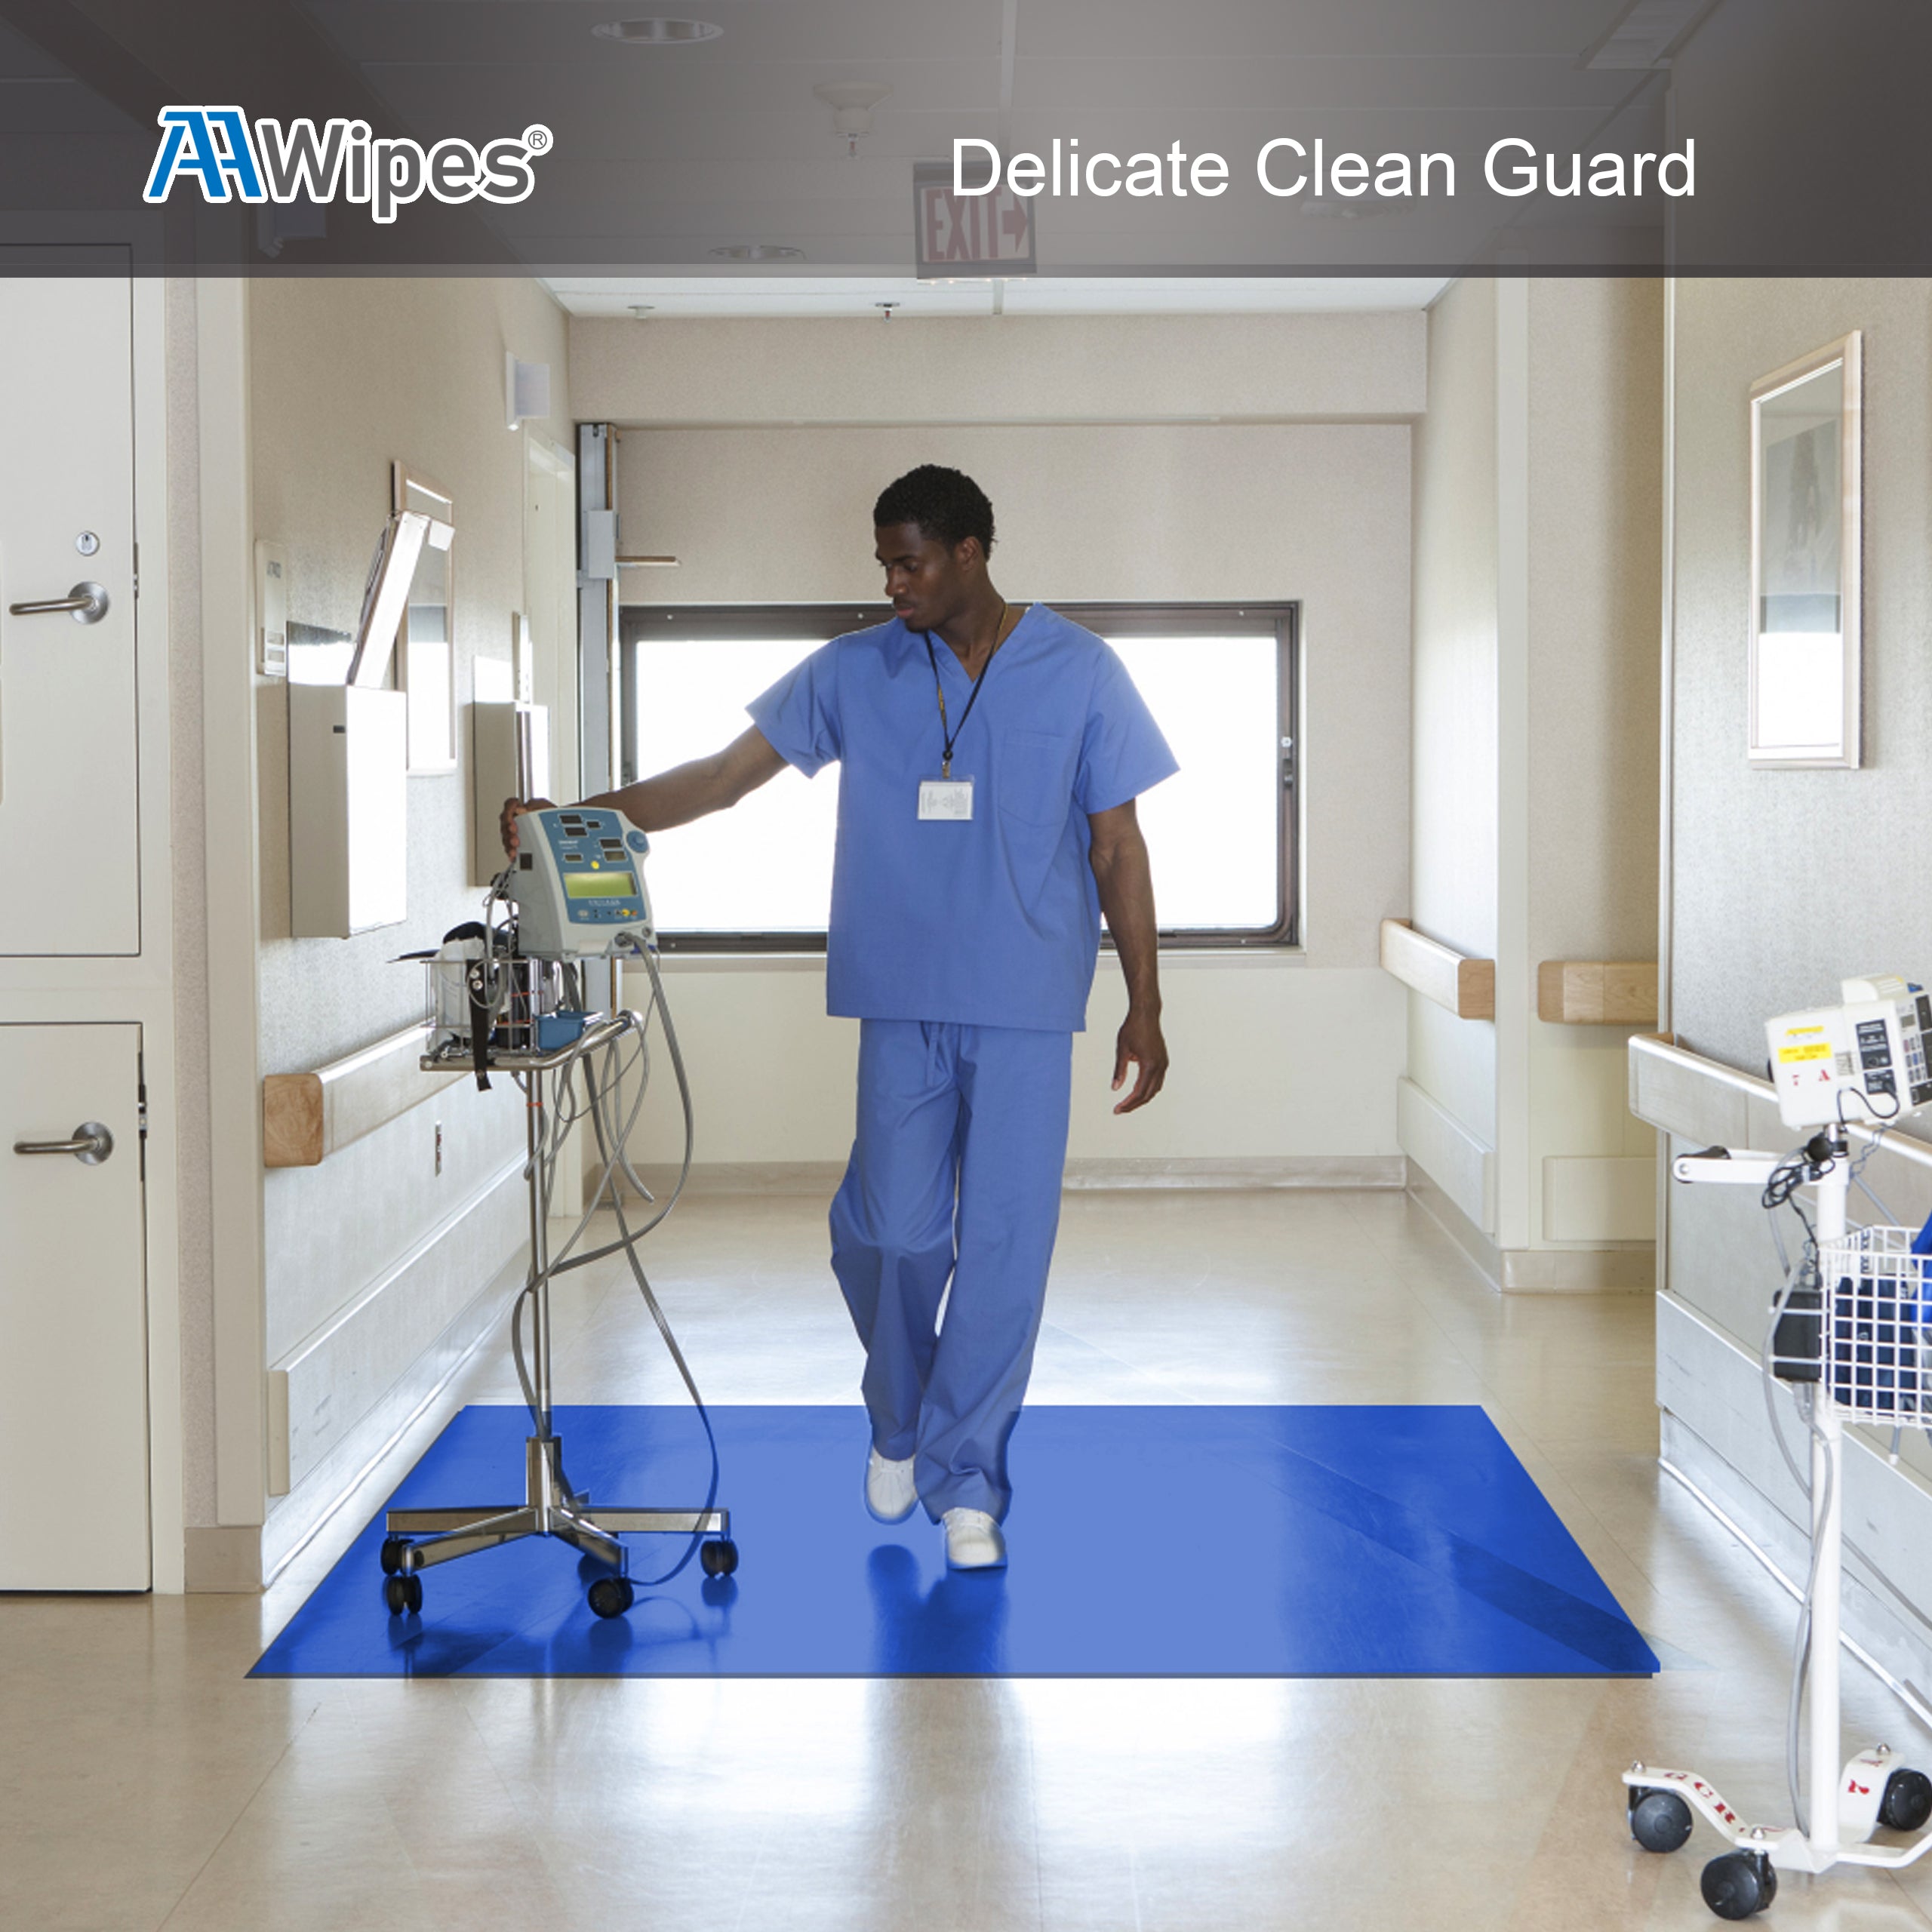 Cleanroom Sticky Floor Mats 24"X36" Blue for Microelectronics, Aerospace, Pharmaceuticals,Food Processing, Hospital, Health Care, Manufacturing, Semiconductor  (6,000 Sheets/200 Mats/20 Boxs/Case) (No. IPSM-2436-300-B)